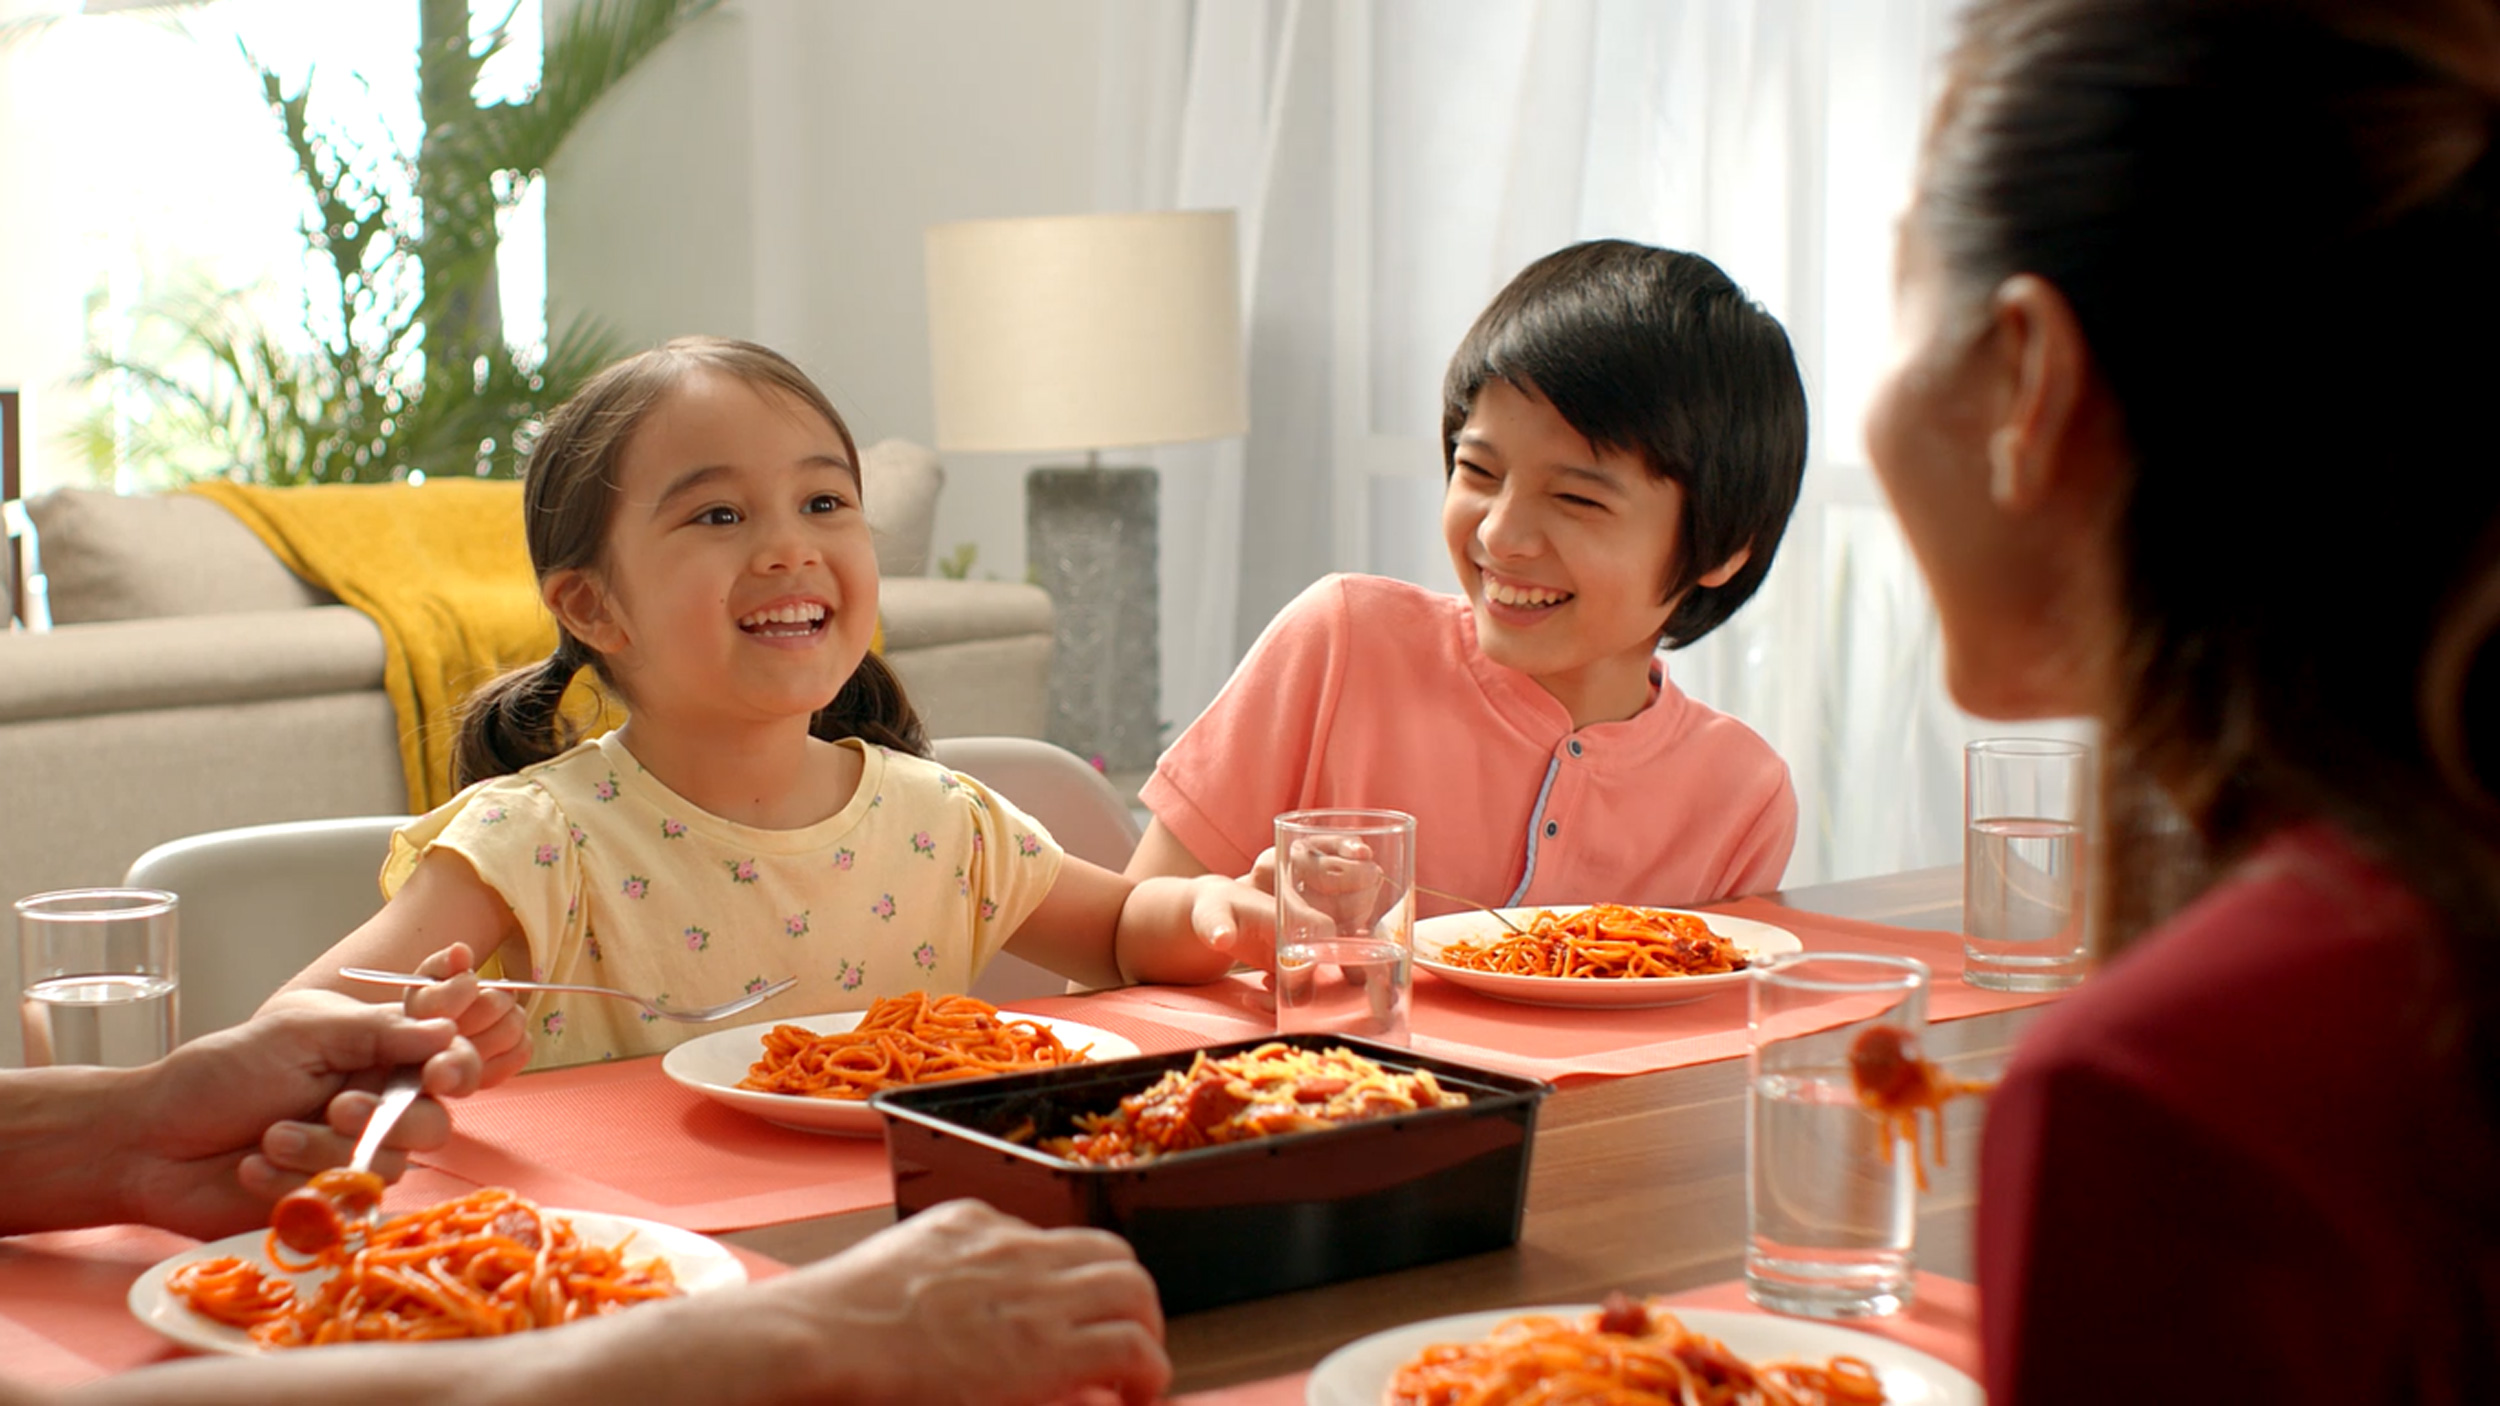 Now more than ever, make bonding moments more sweet-sarap with Jolly Spaghetti